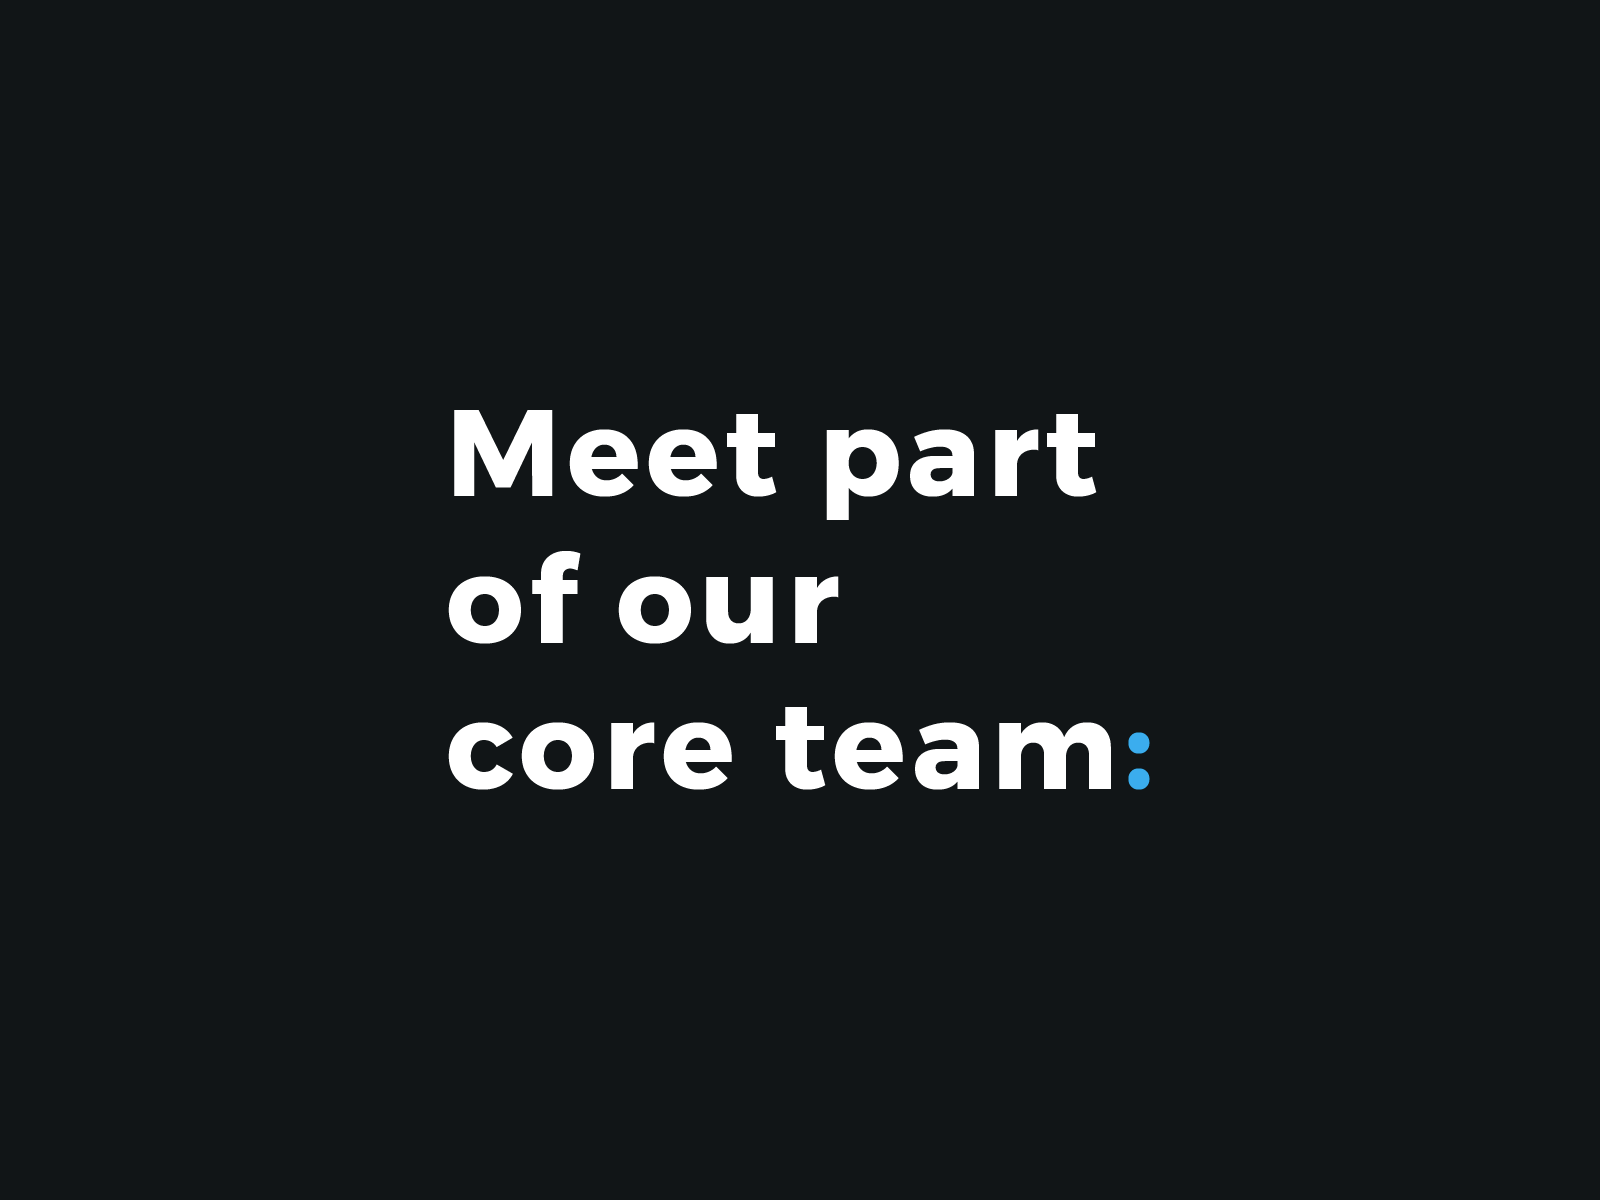 Meet part of our core team